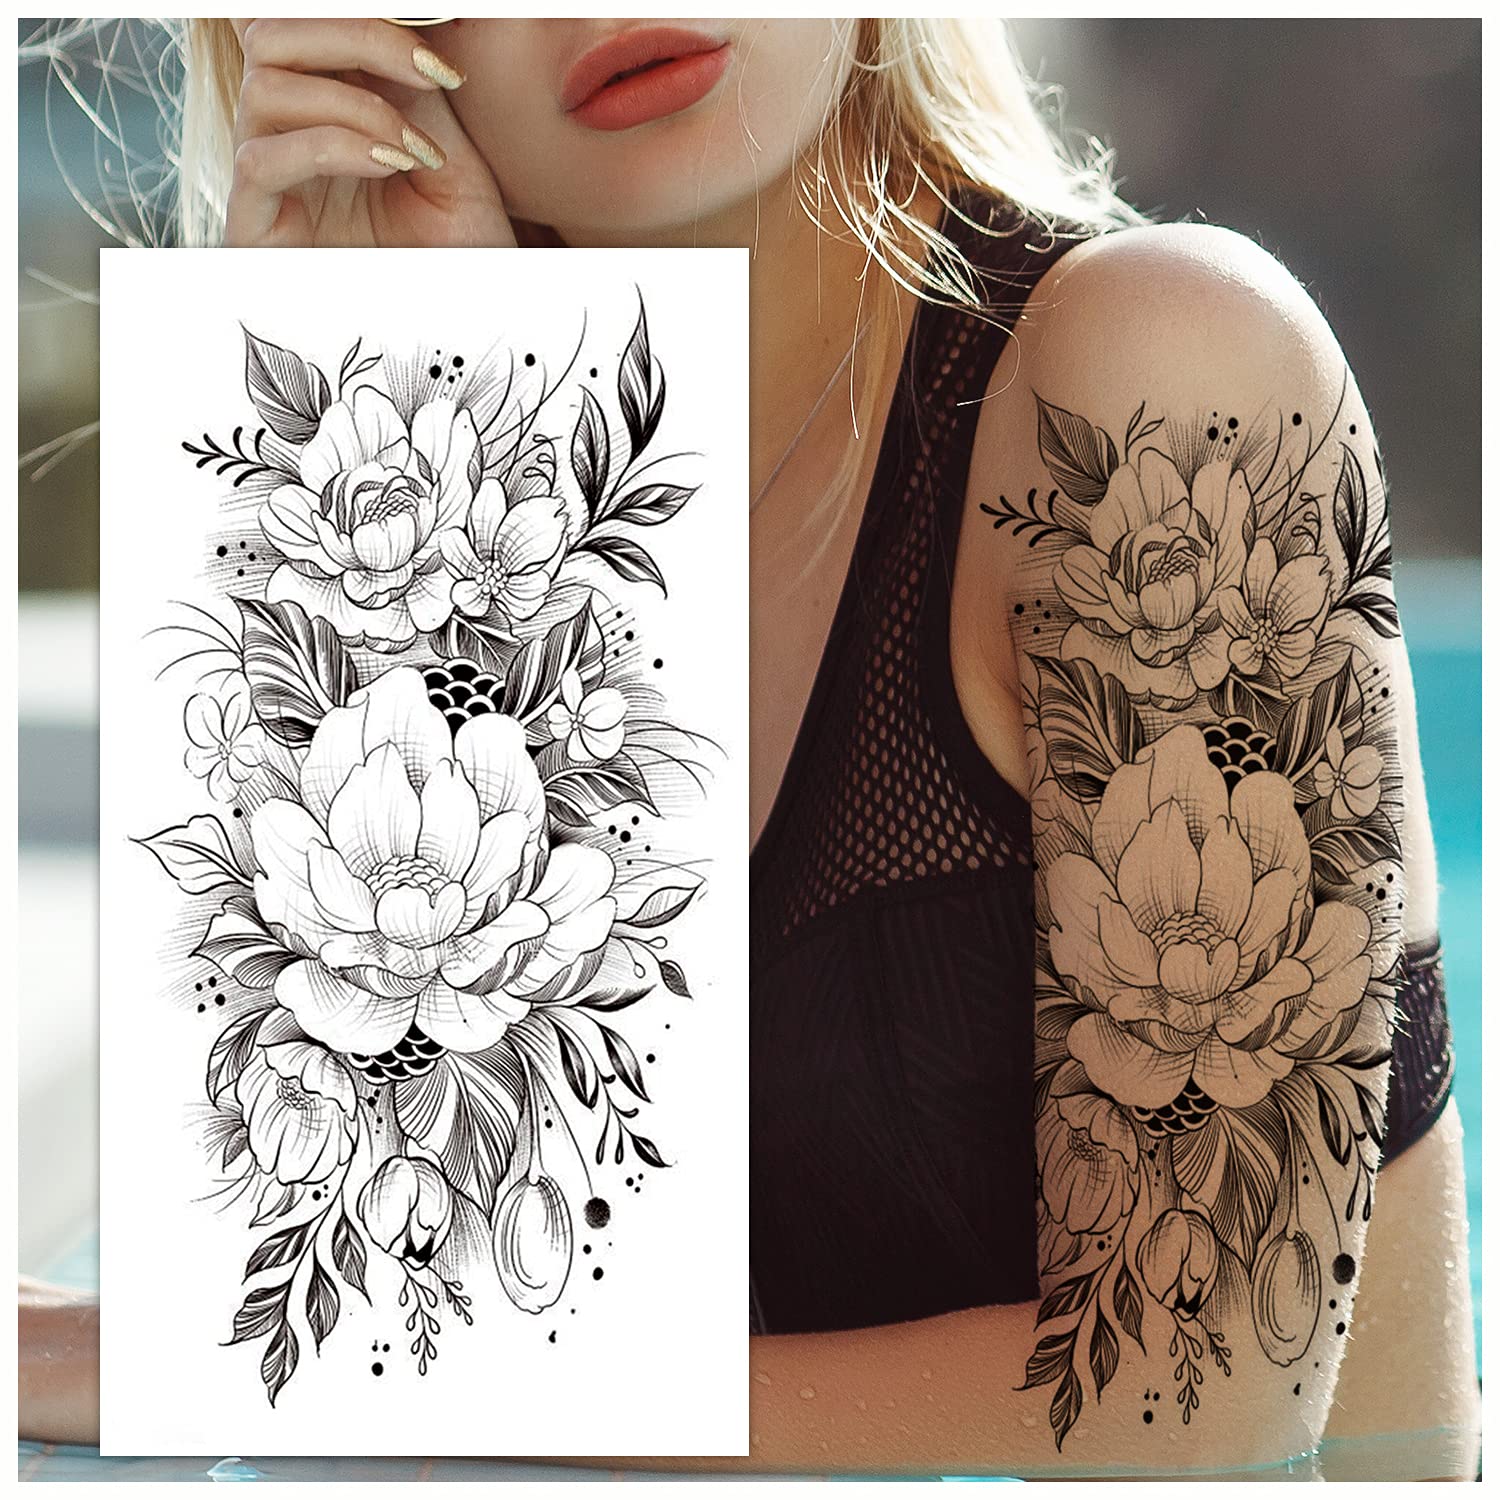 12 Sheets Temporary Tattoos For Women, Large Flower Fake Tattoos